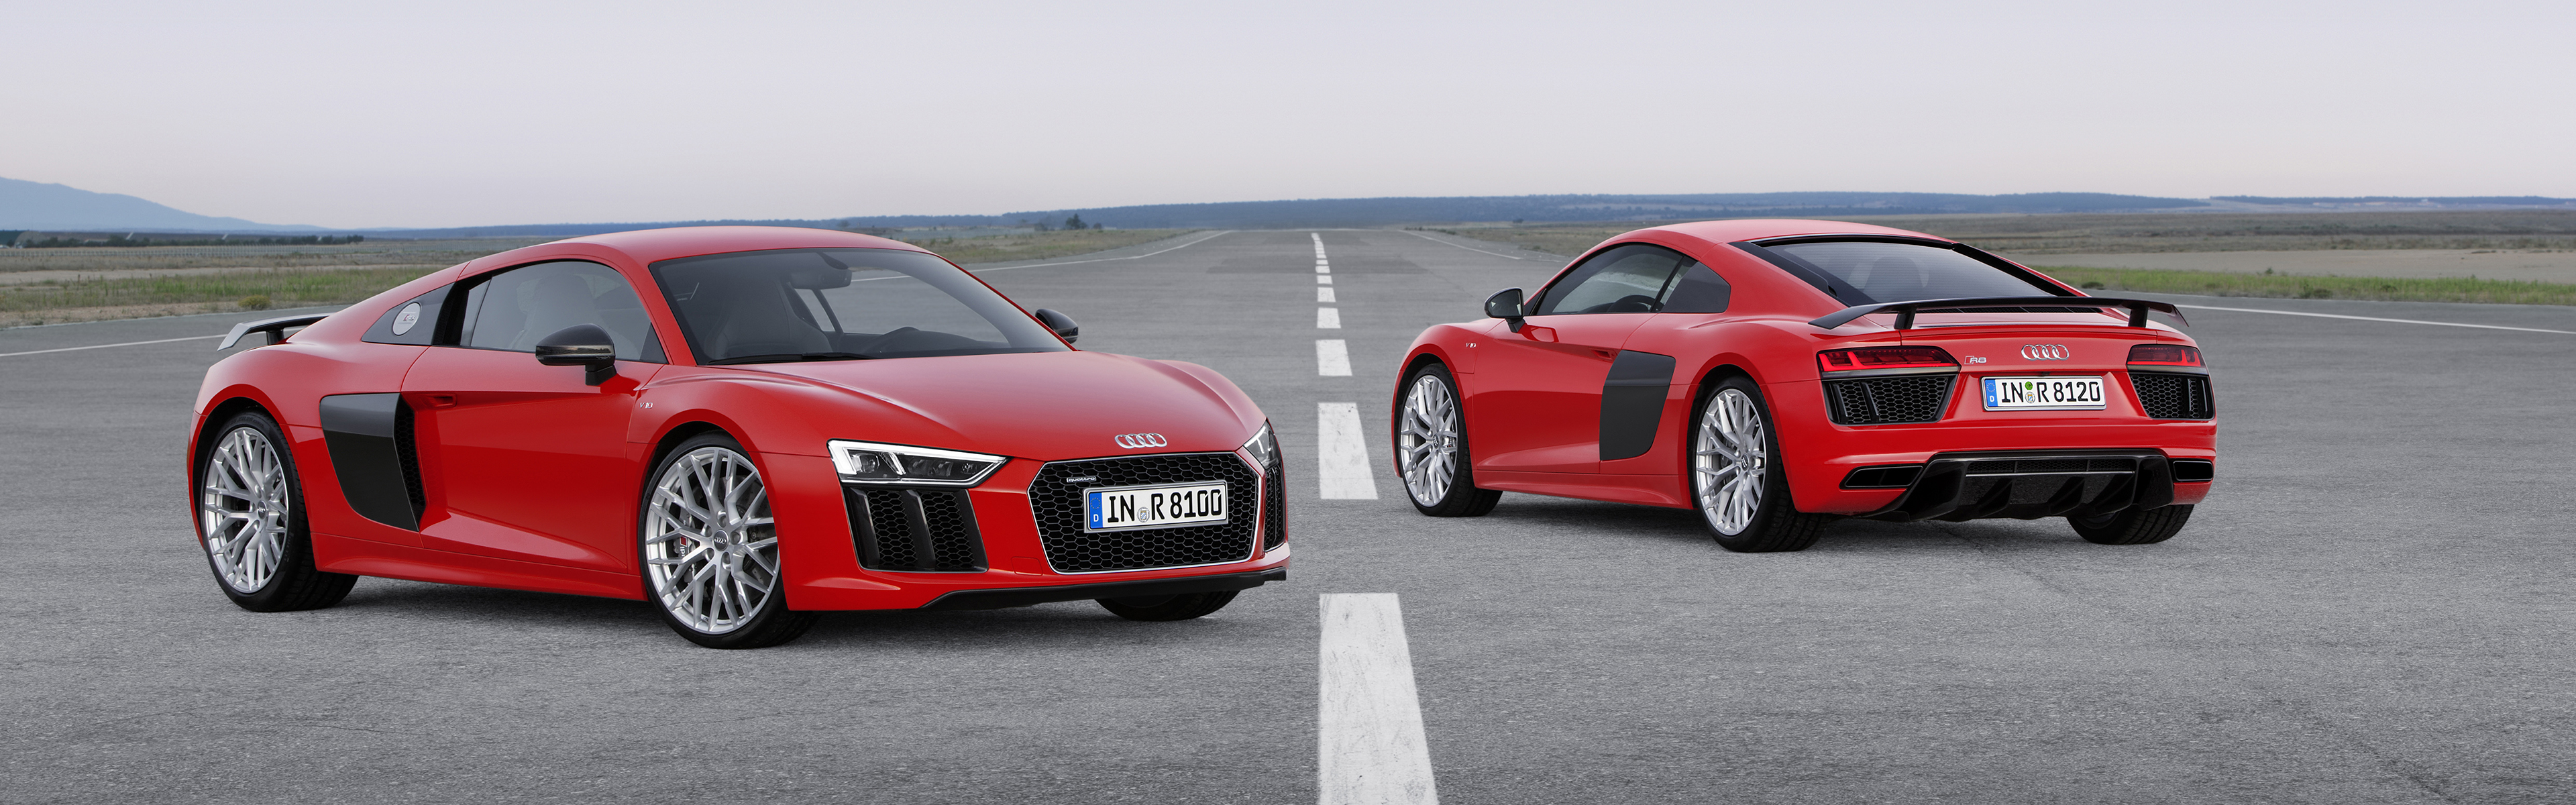 Audi R8 Car Vehicle Super Car Dual Monitors Multiple Display Red Cars Front Angle View Audi R8 Type  3840x1200